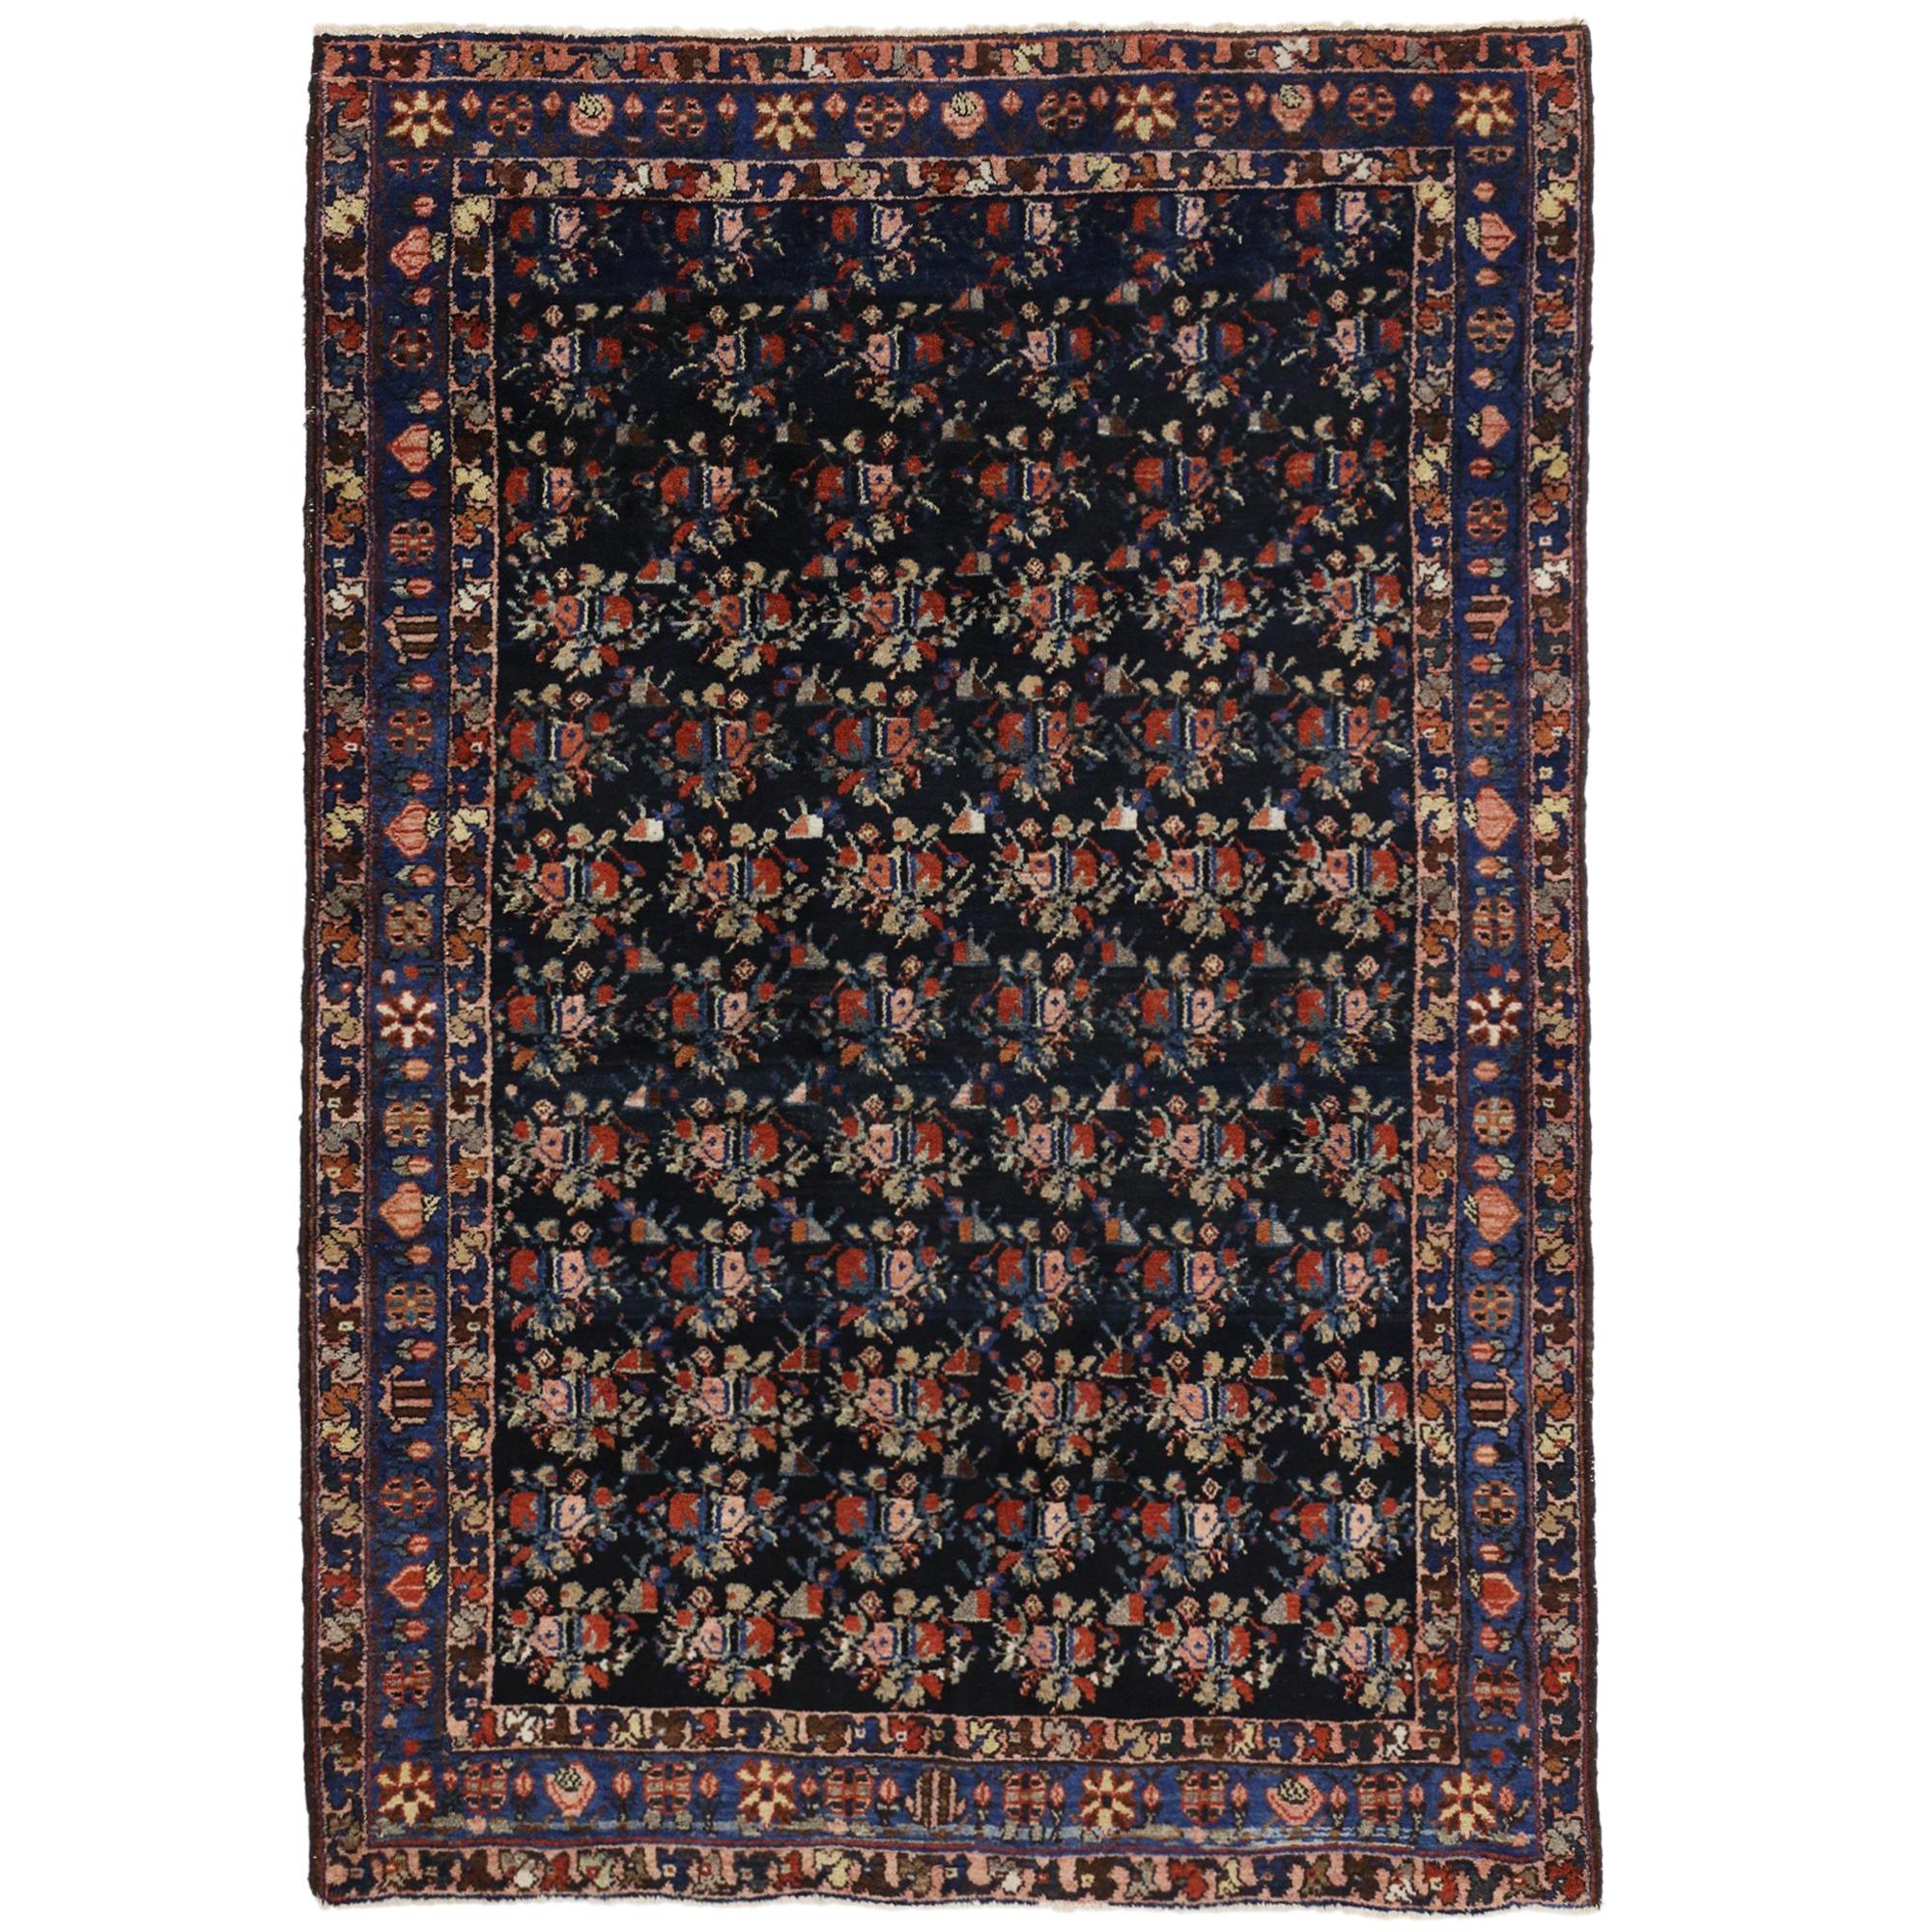 Antique Persian Hamadan Rug with Art Deco Style, Entry or Foyer Rug